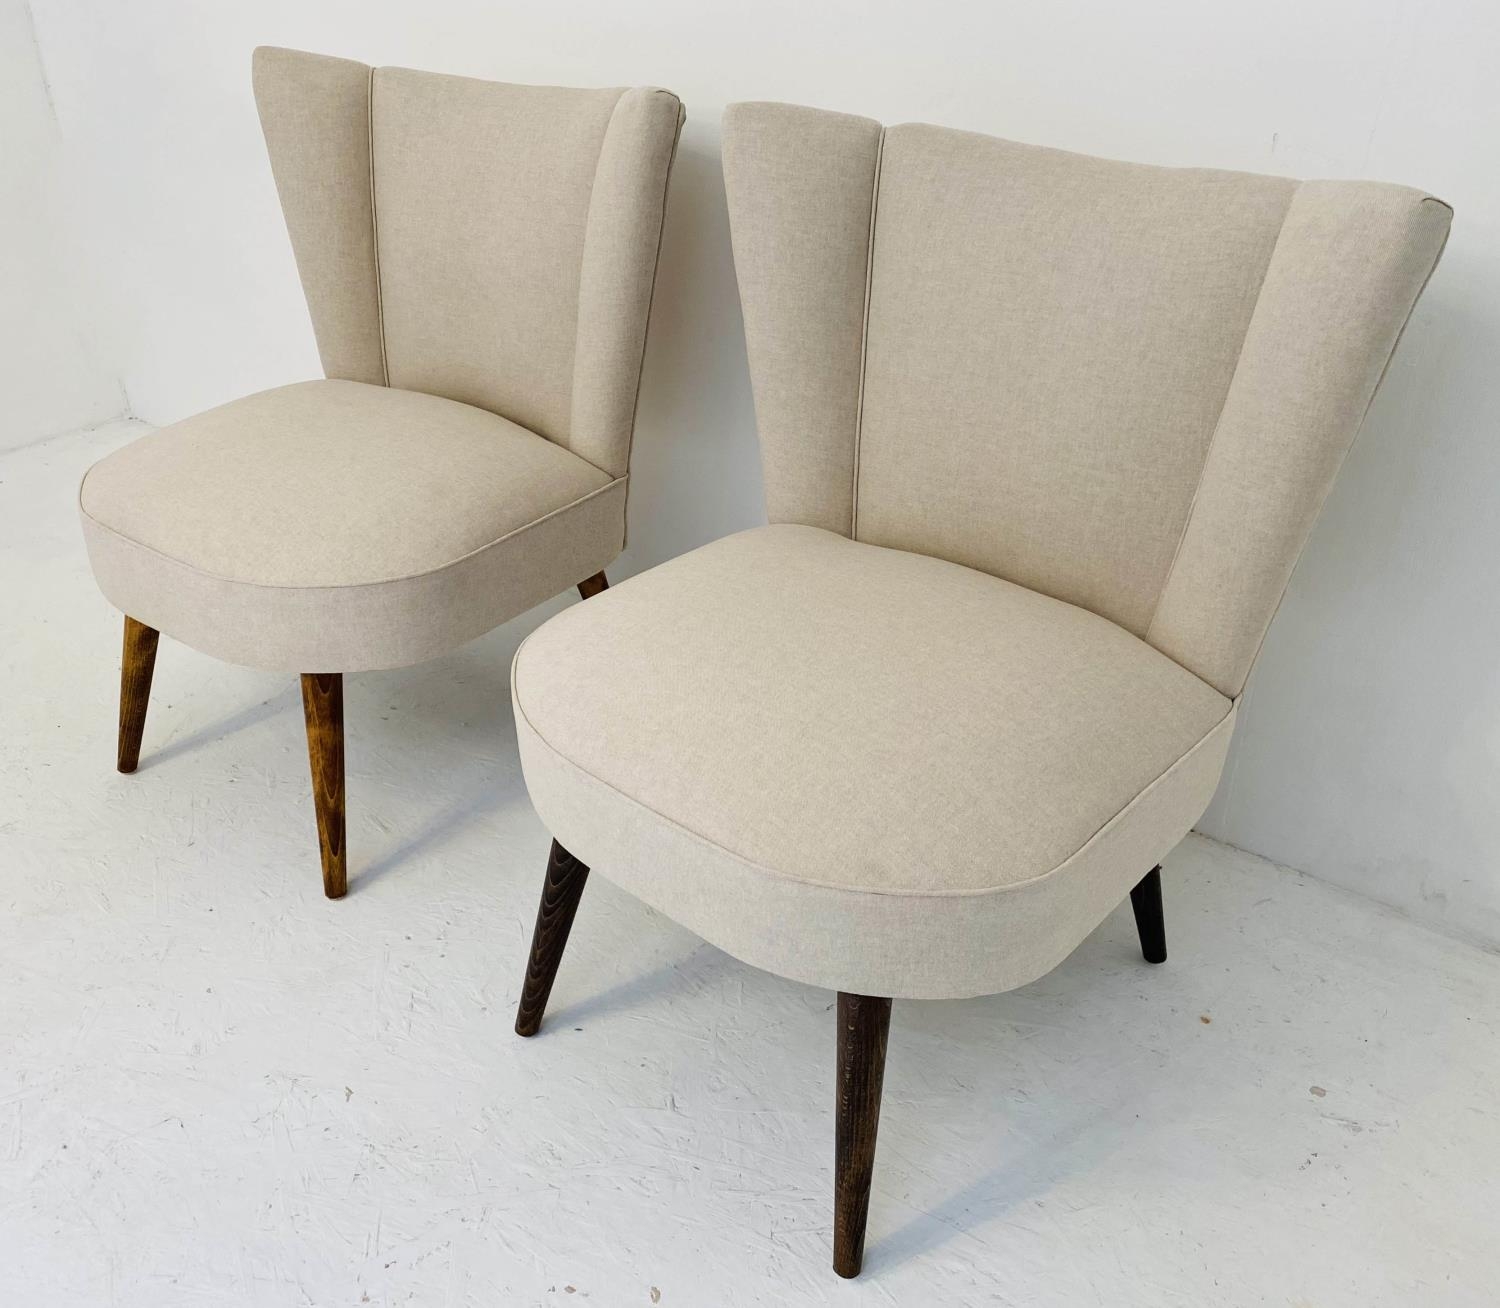 SIDE CHAIRS, a pair, 82cm x 65cm x 68cm, 1960s Danish style, neutral linen upholstery. (2) - Image 3 of 5